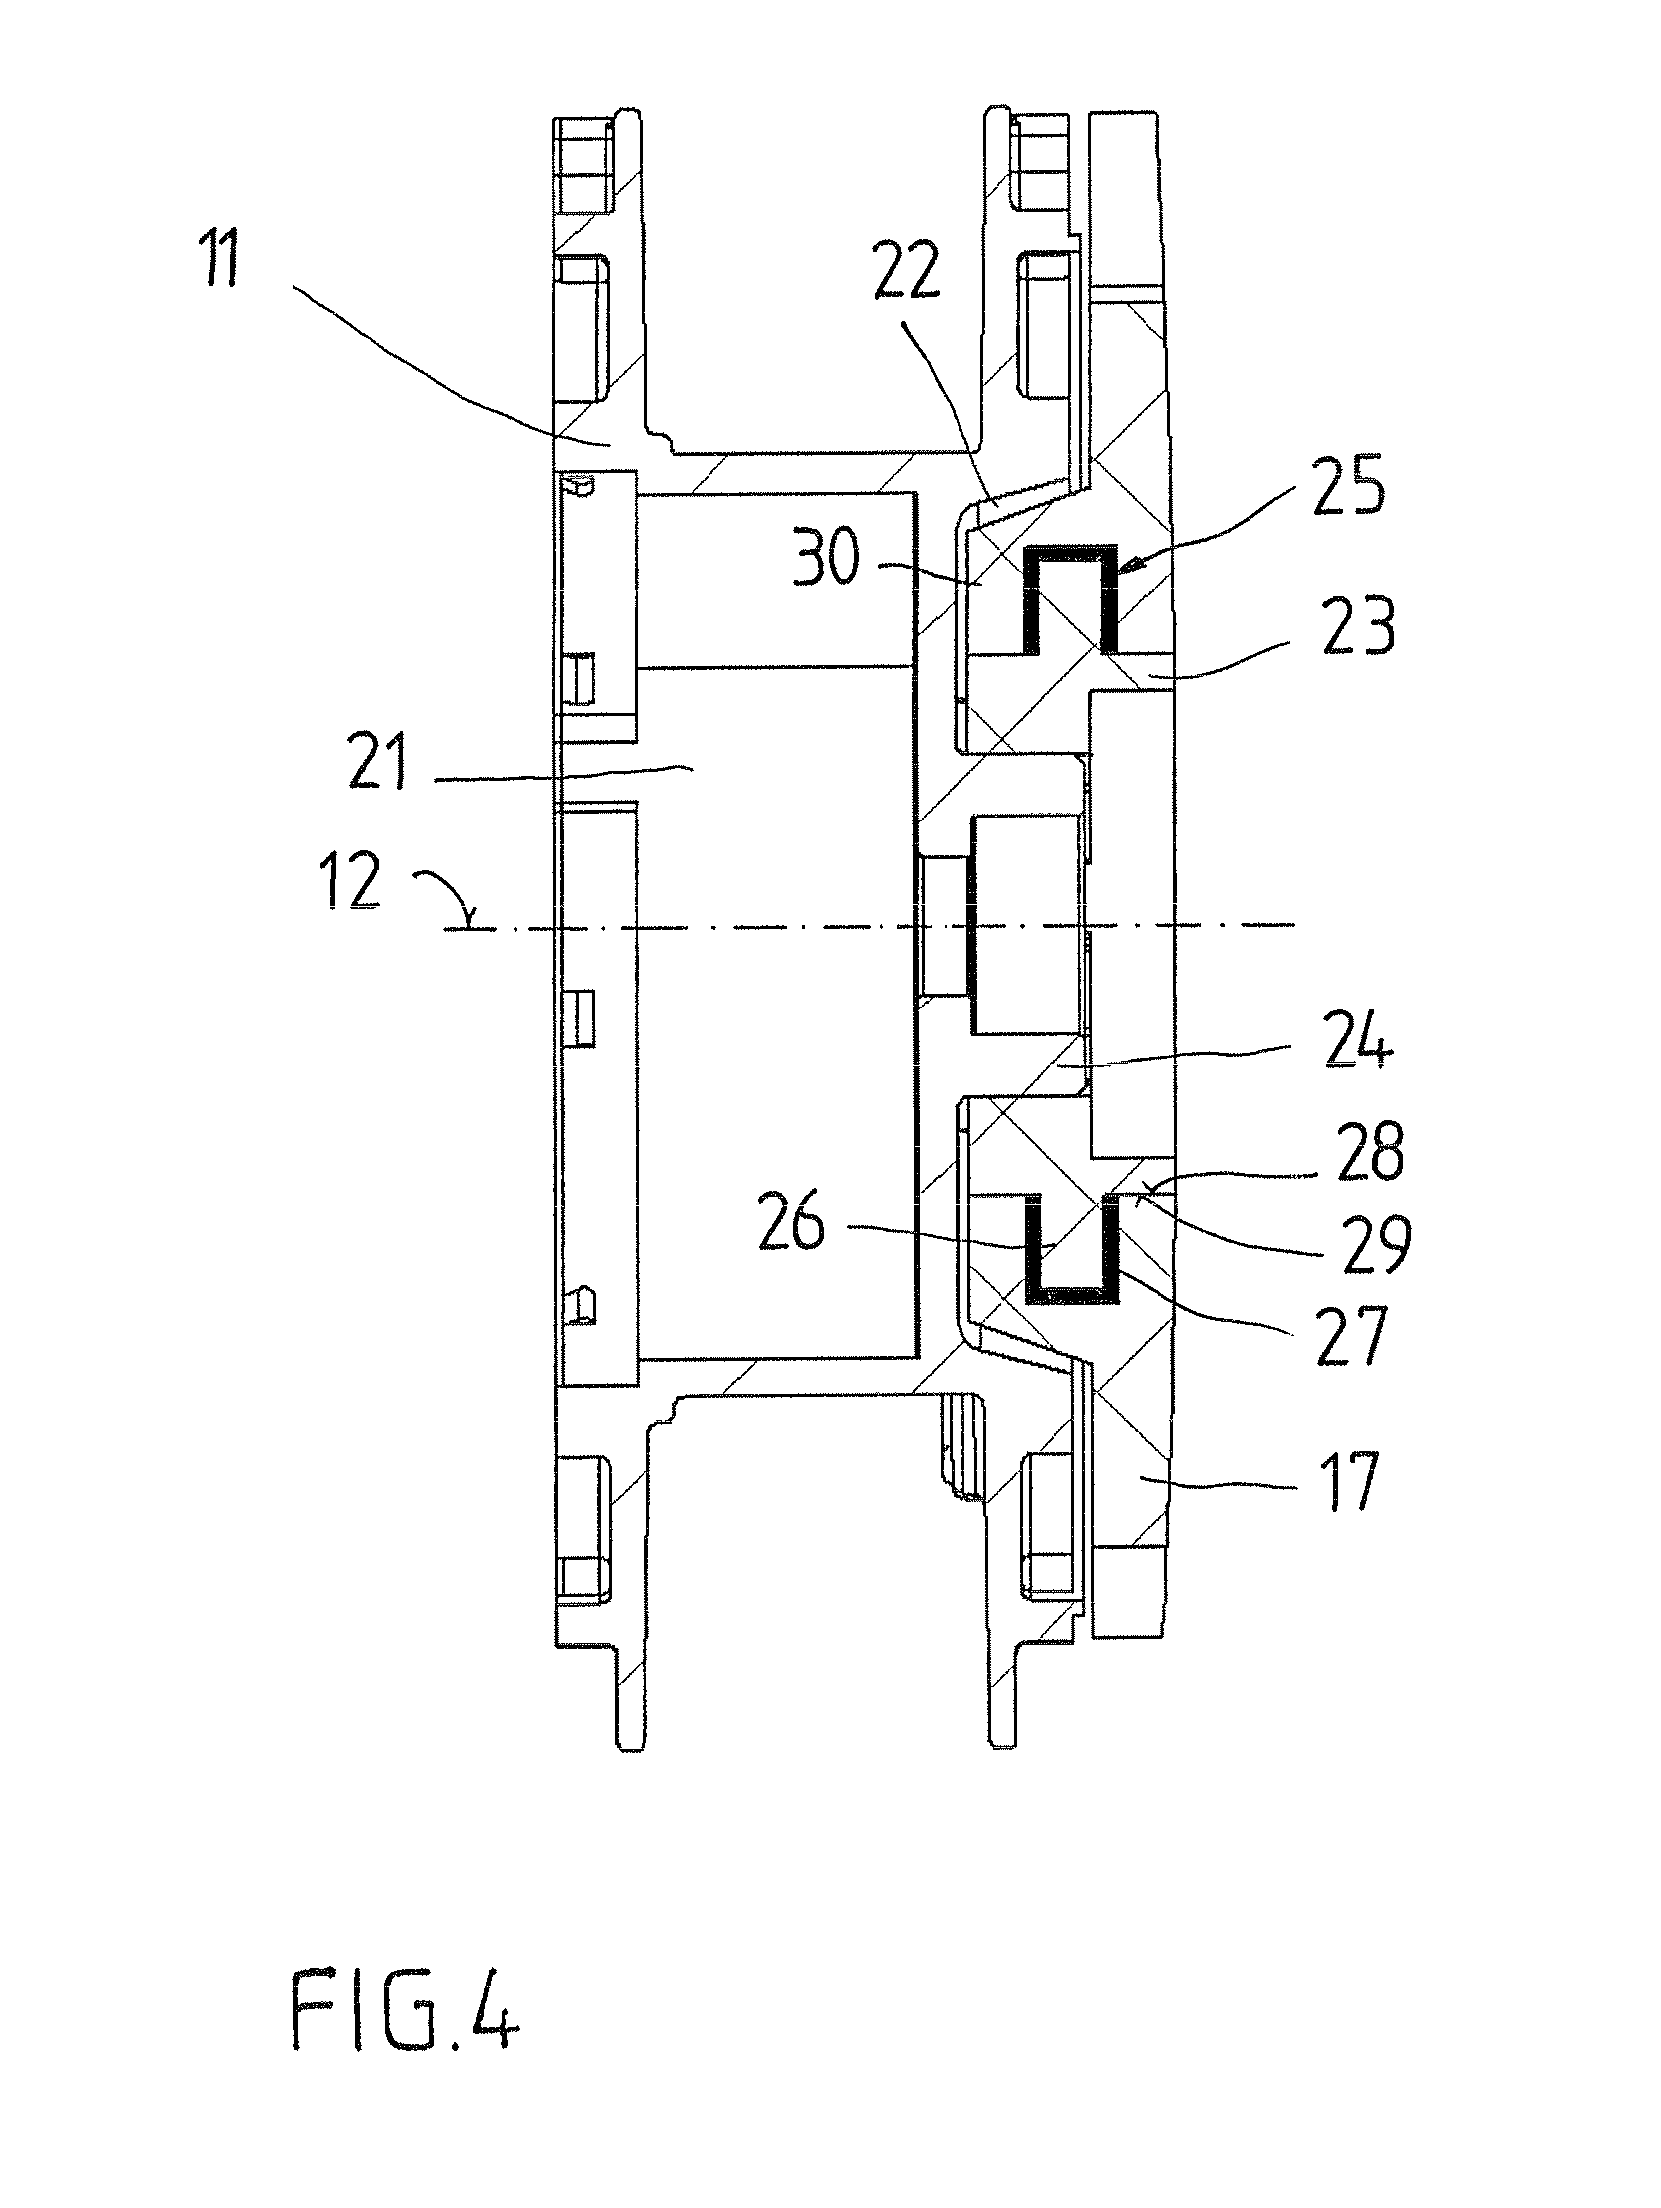 Braking device for a rope pulley of a mechanically retractable and extendable leash for walking animals